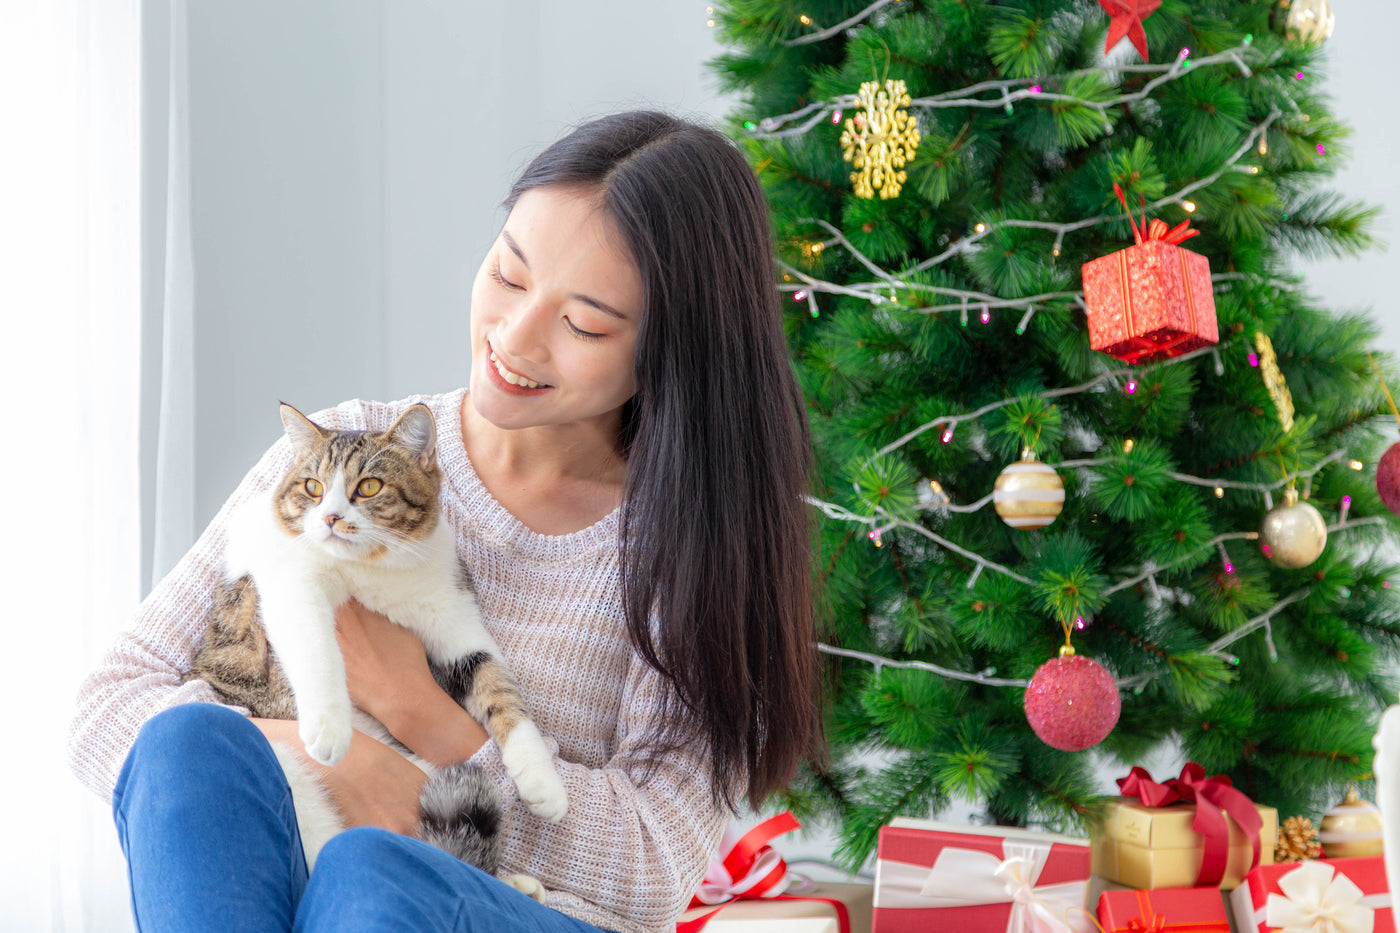 Top 10 Christmas Gifts for Cats of 2021